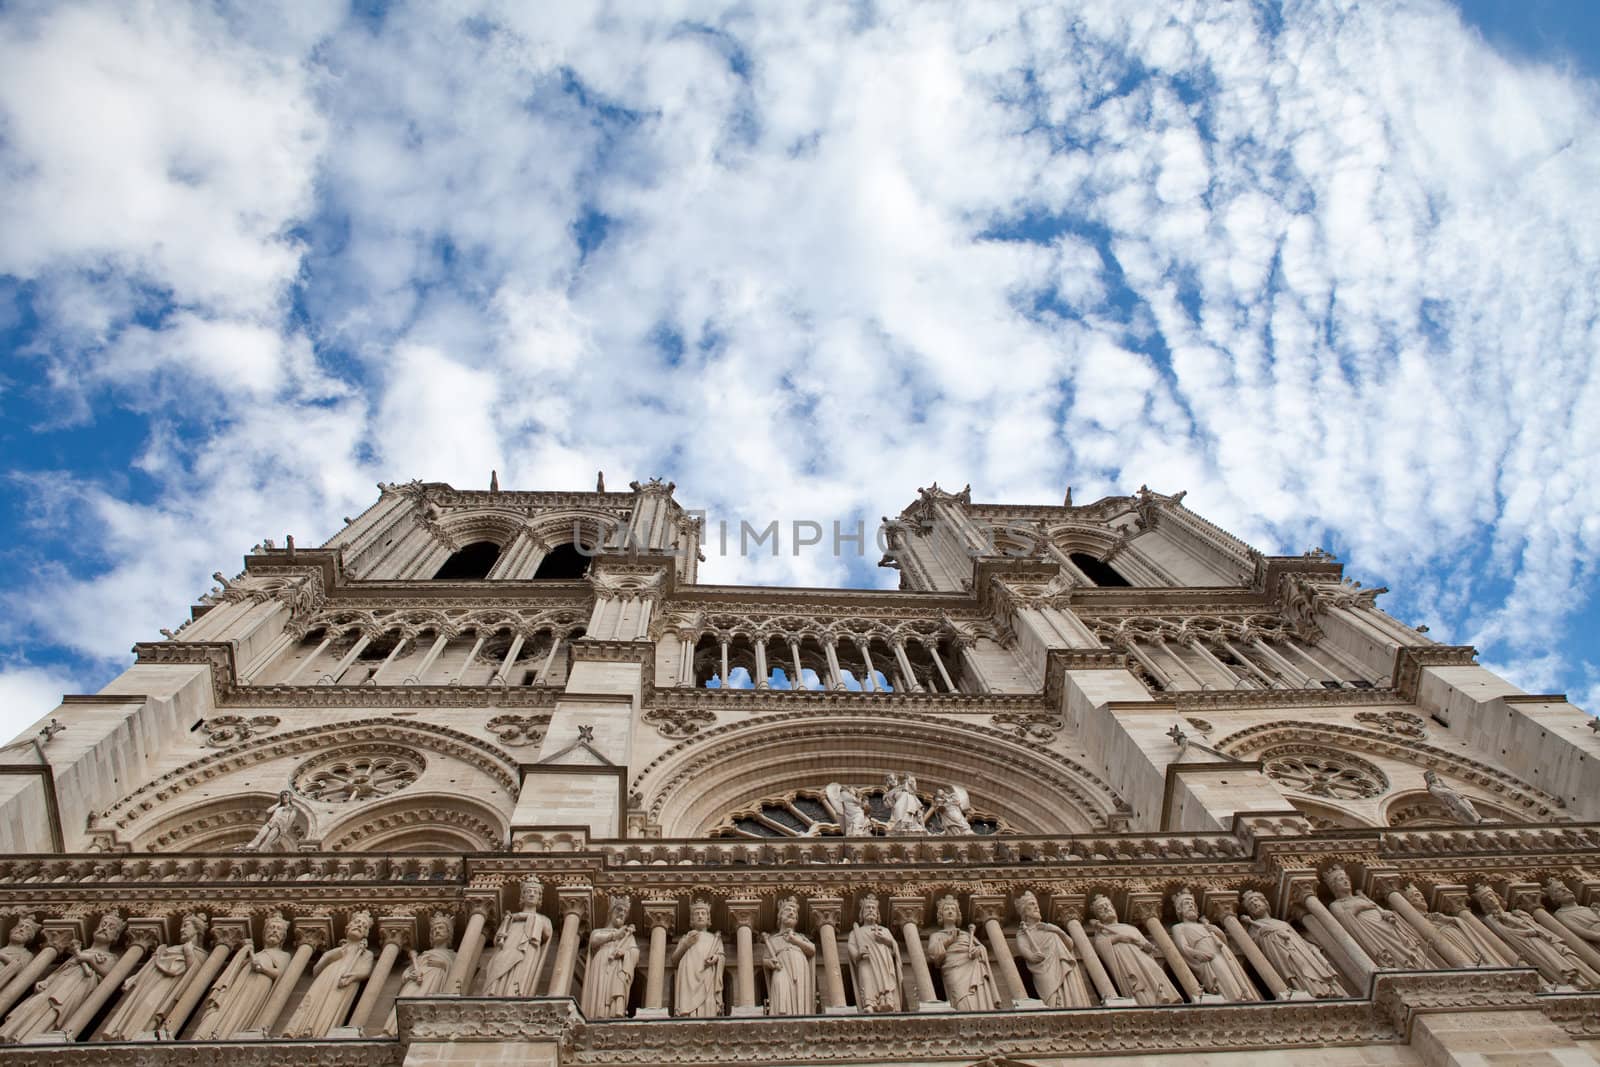 Famous landmark Gothic catholic cathedral Notre-dame on Cite island in Paris France on the blue and cloudy sky background